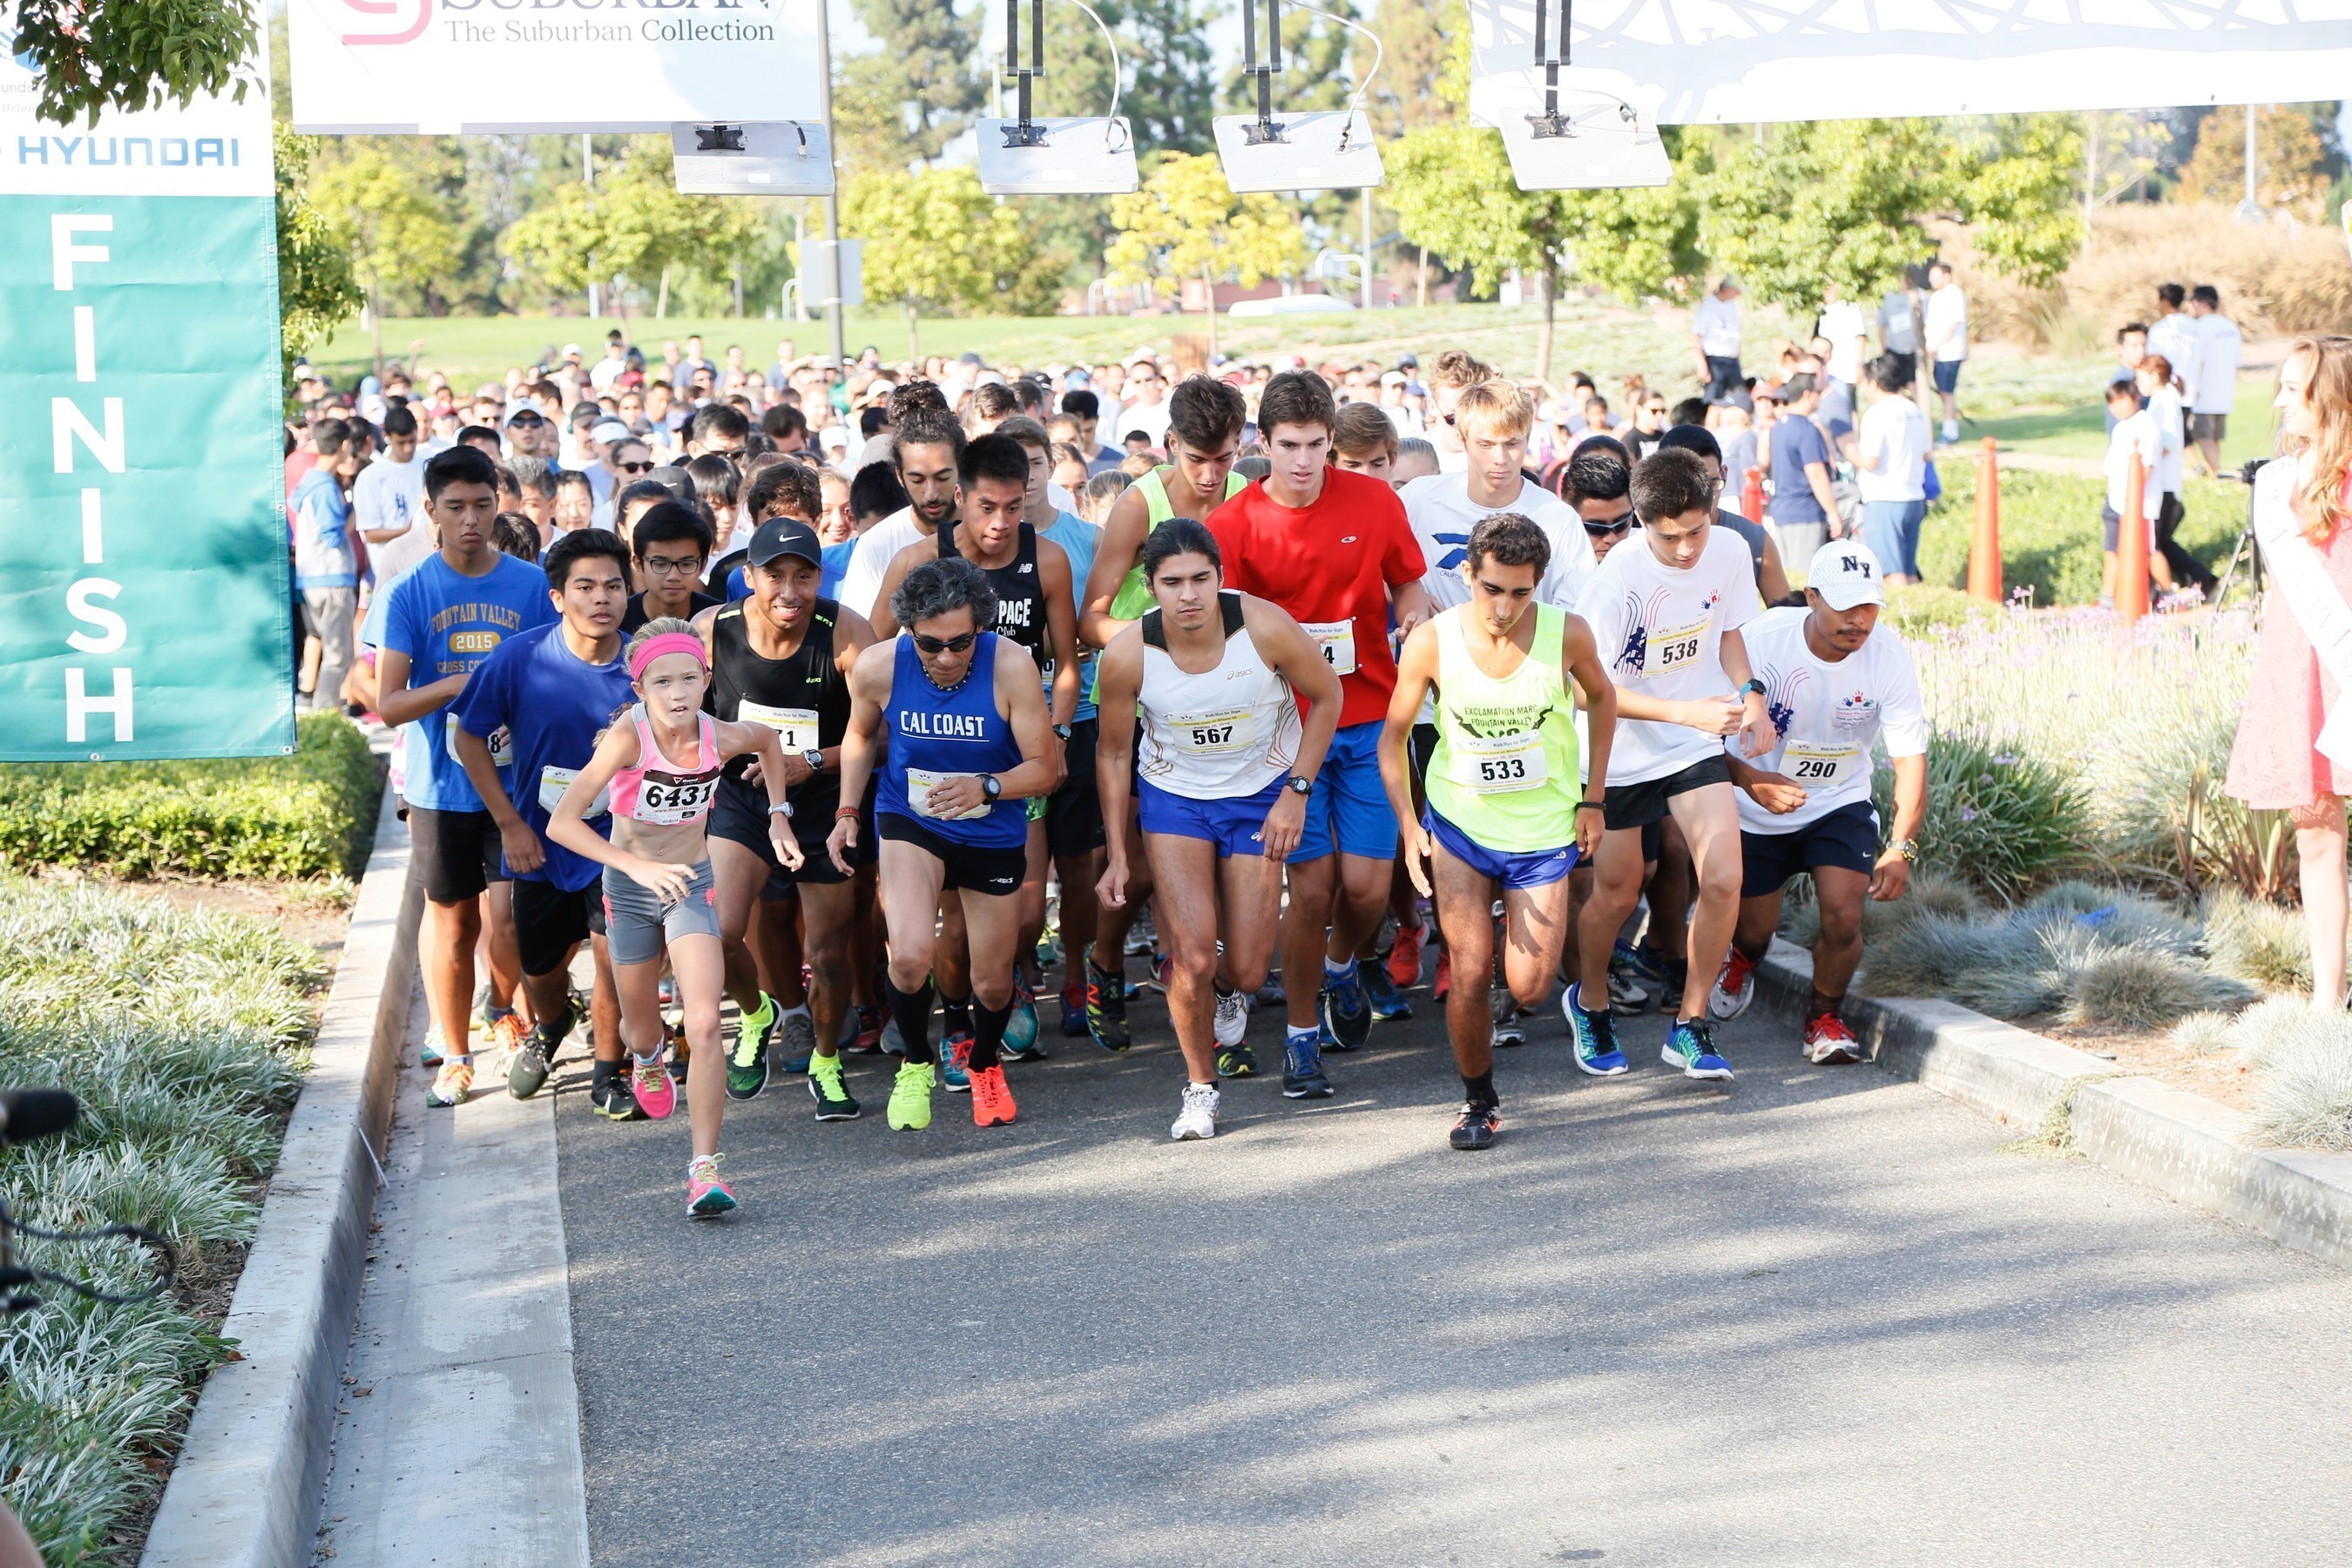 The 5K/10K Run/Walk participants in action.